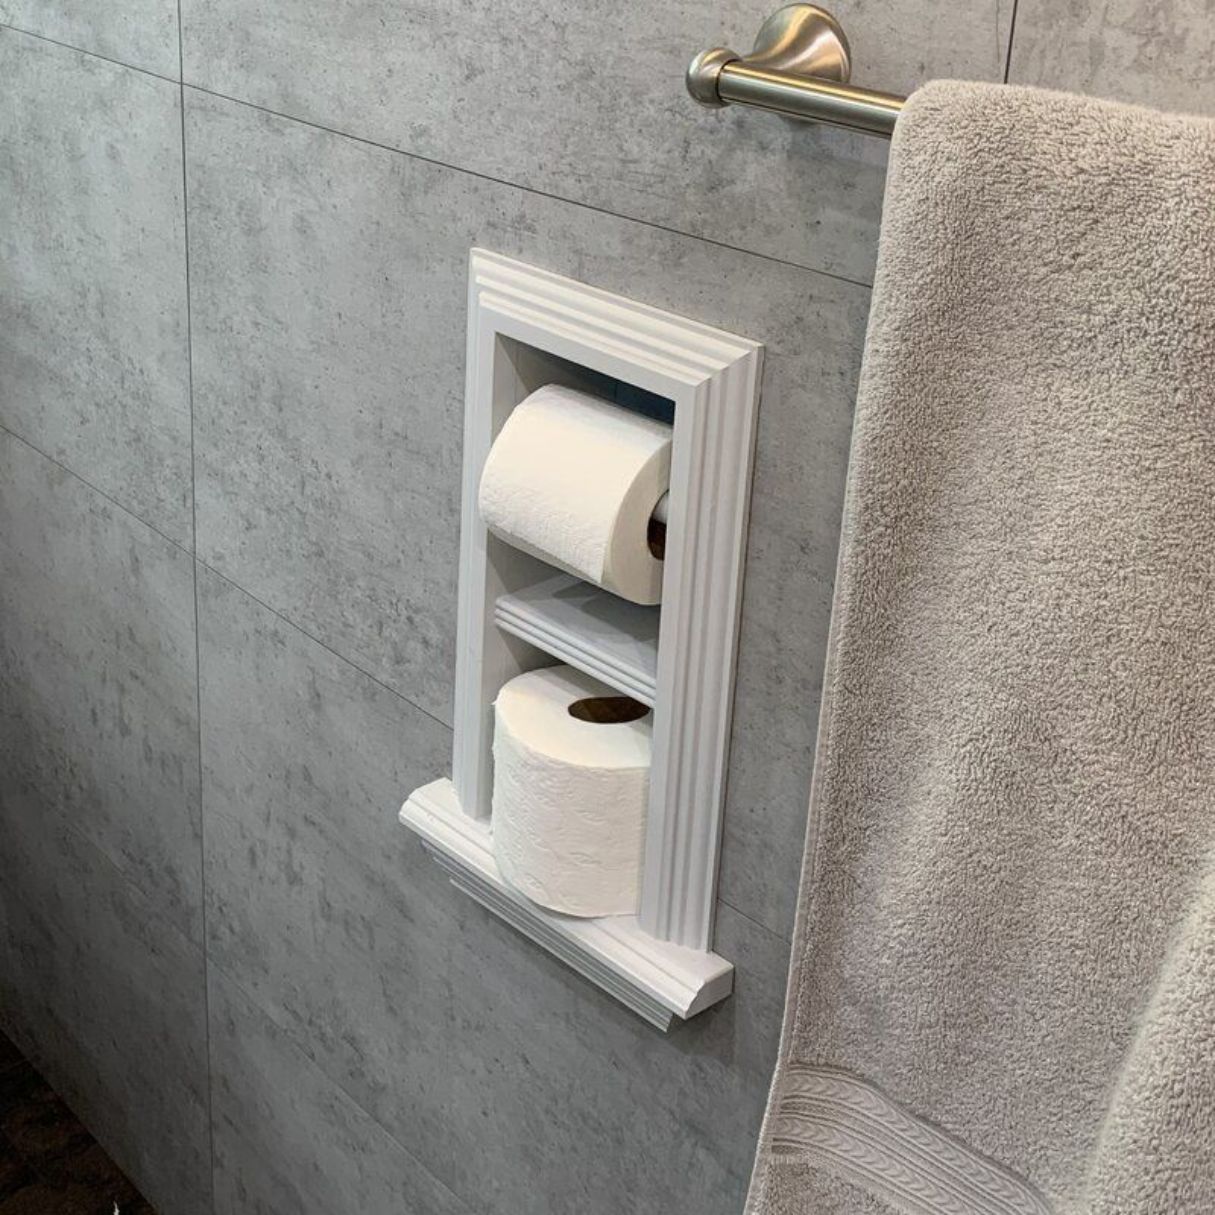 How To Install Recessed Toilet Paper Holder Into Drywall